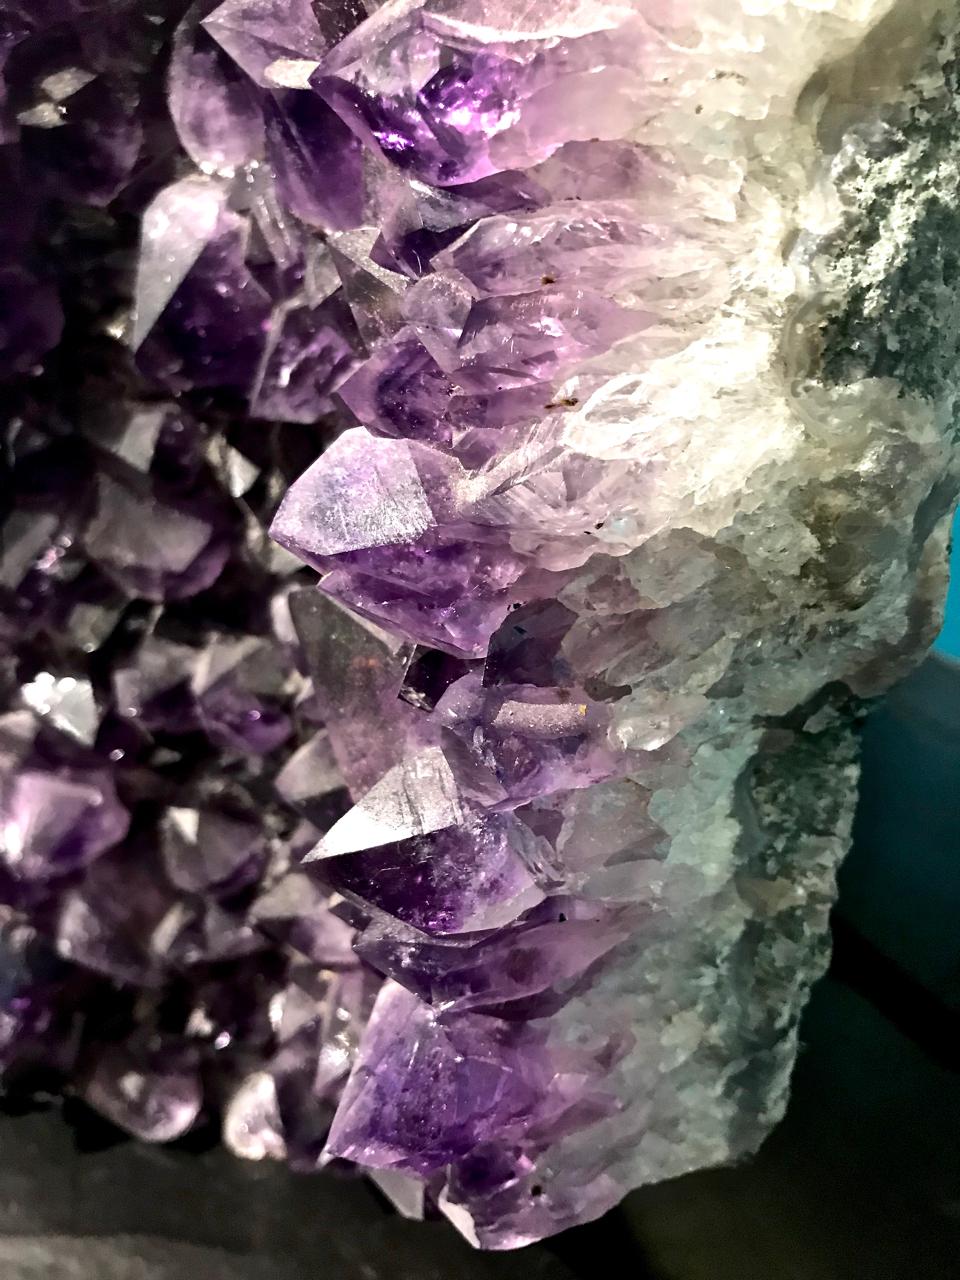 This is a stunning double or twin geode revealing beautifully colored and large amethyst crystal with wonderful points encased by rock crystal. The double or twinned geode formation is unusual.